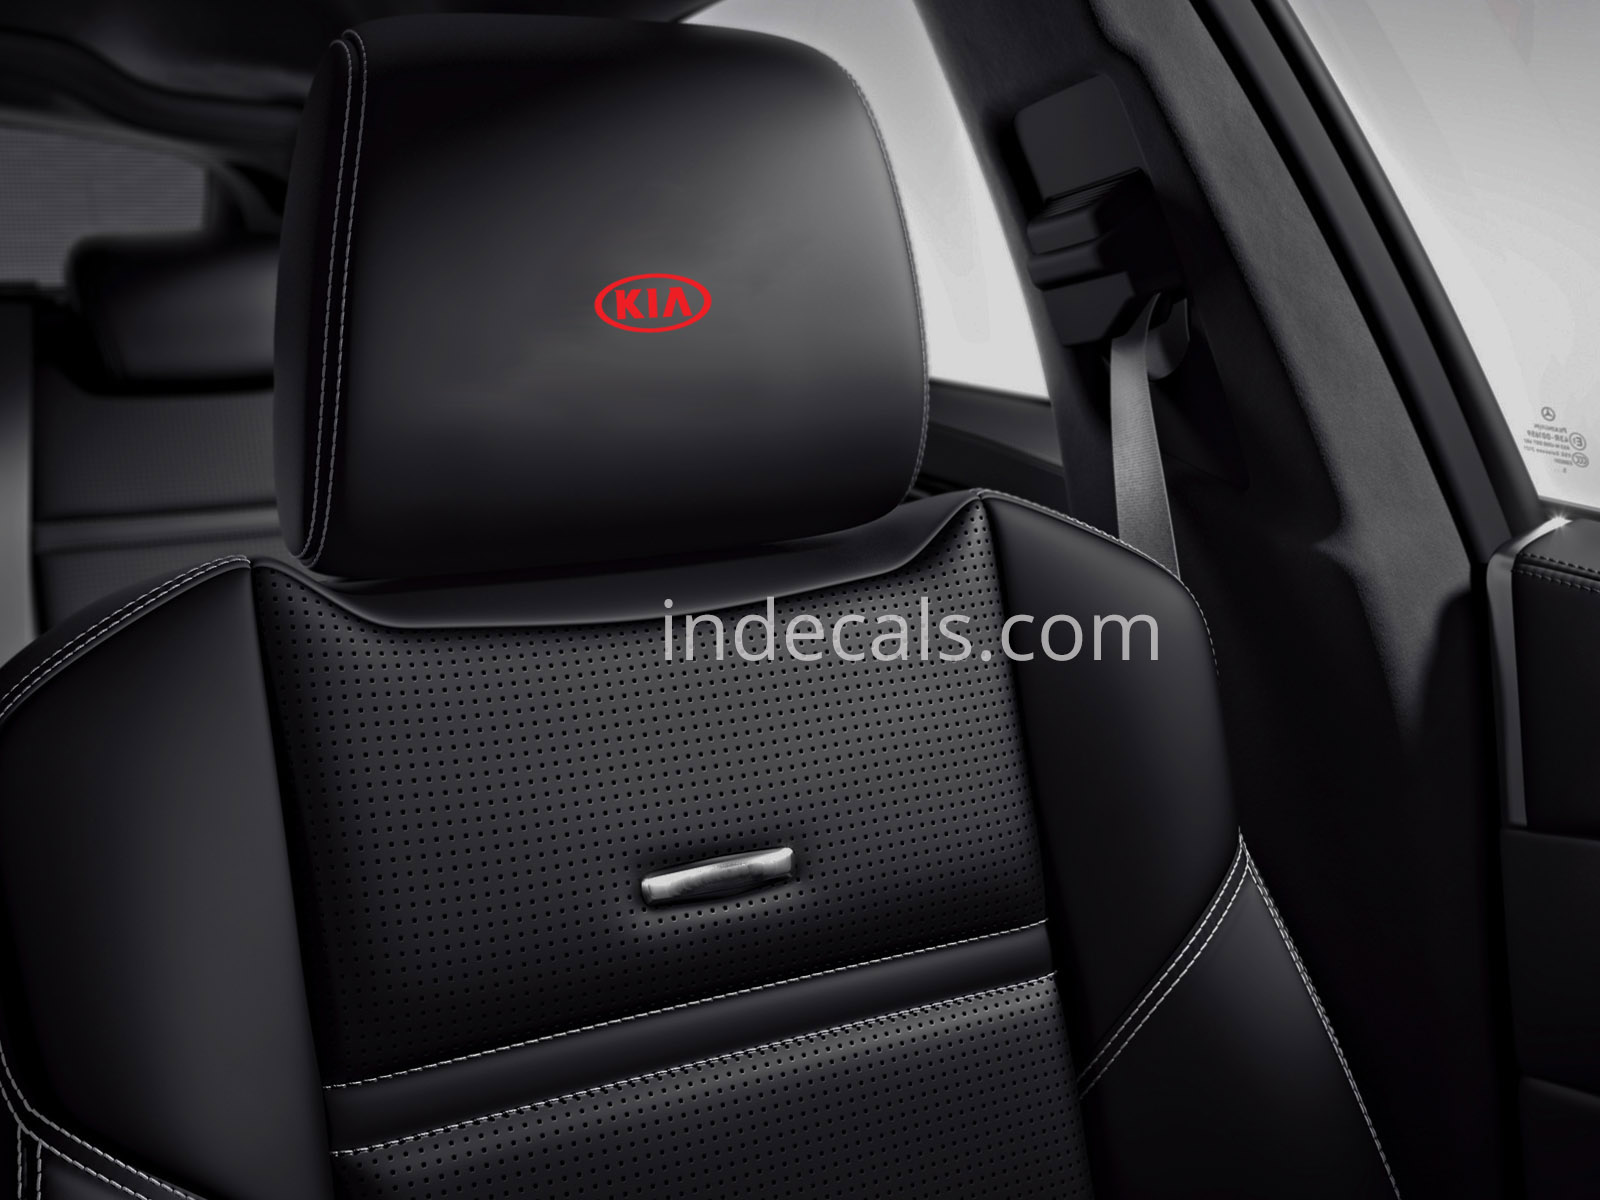 6 x KIA Stickers for Headrests - Red